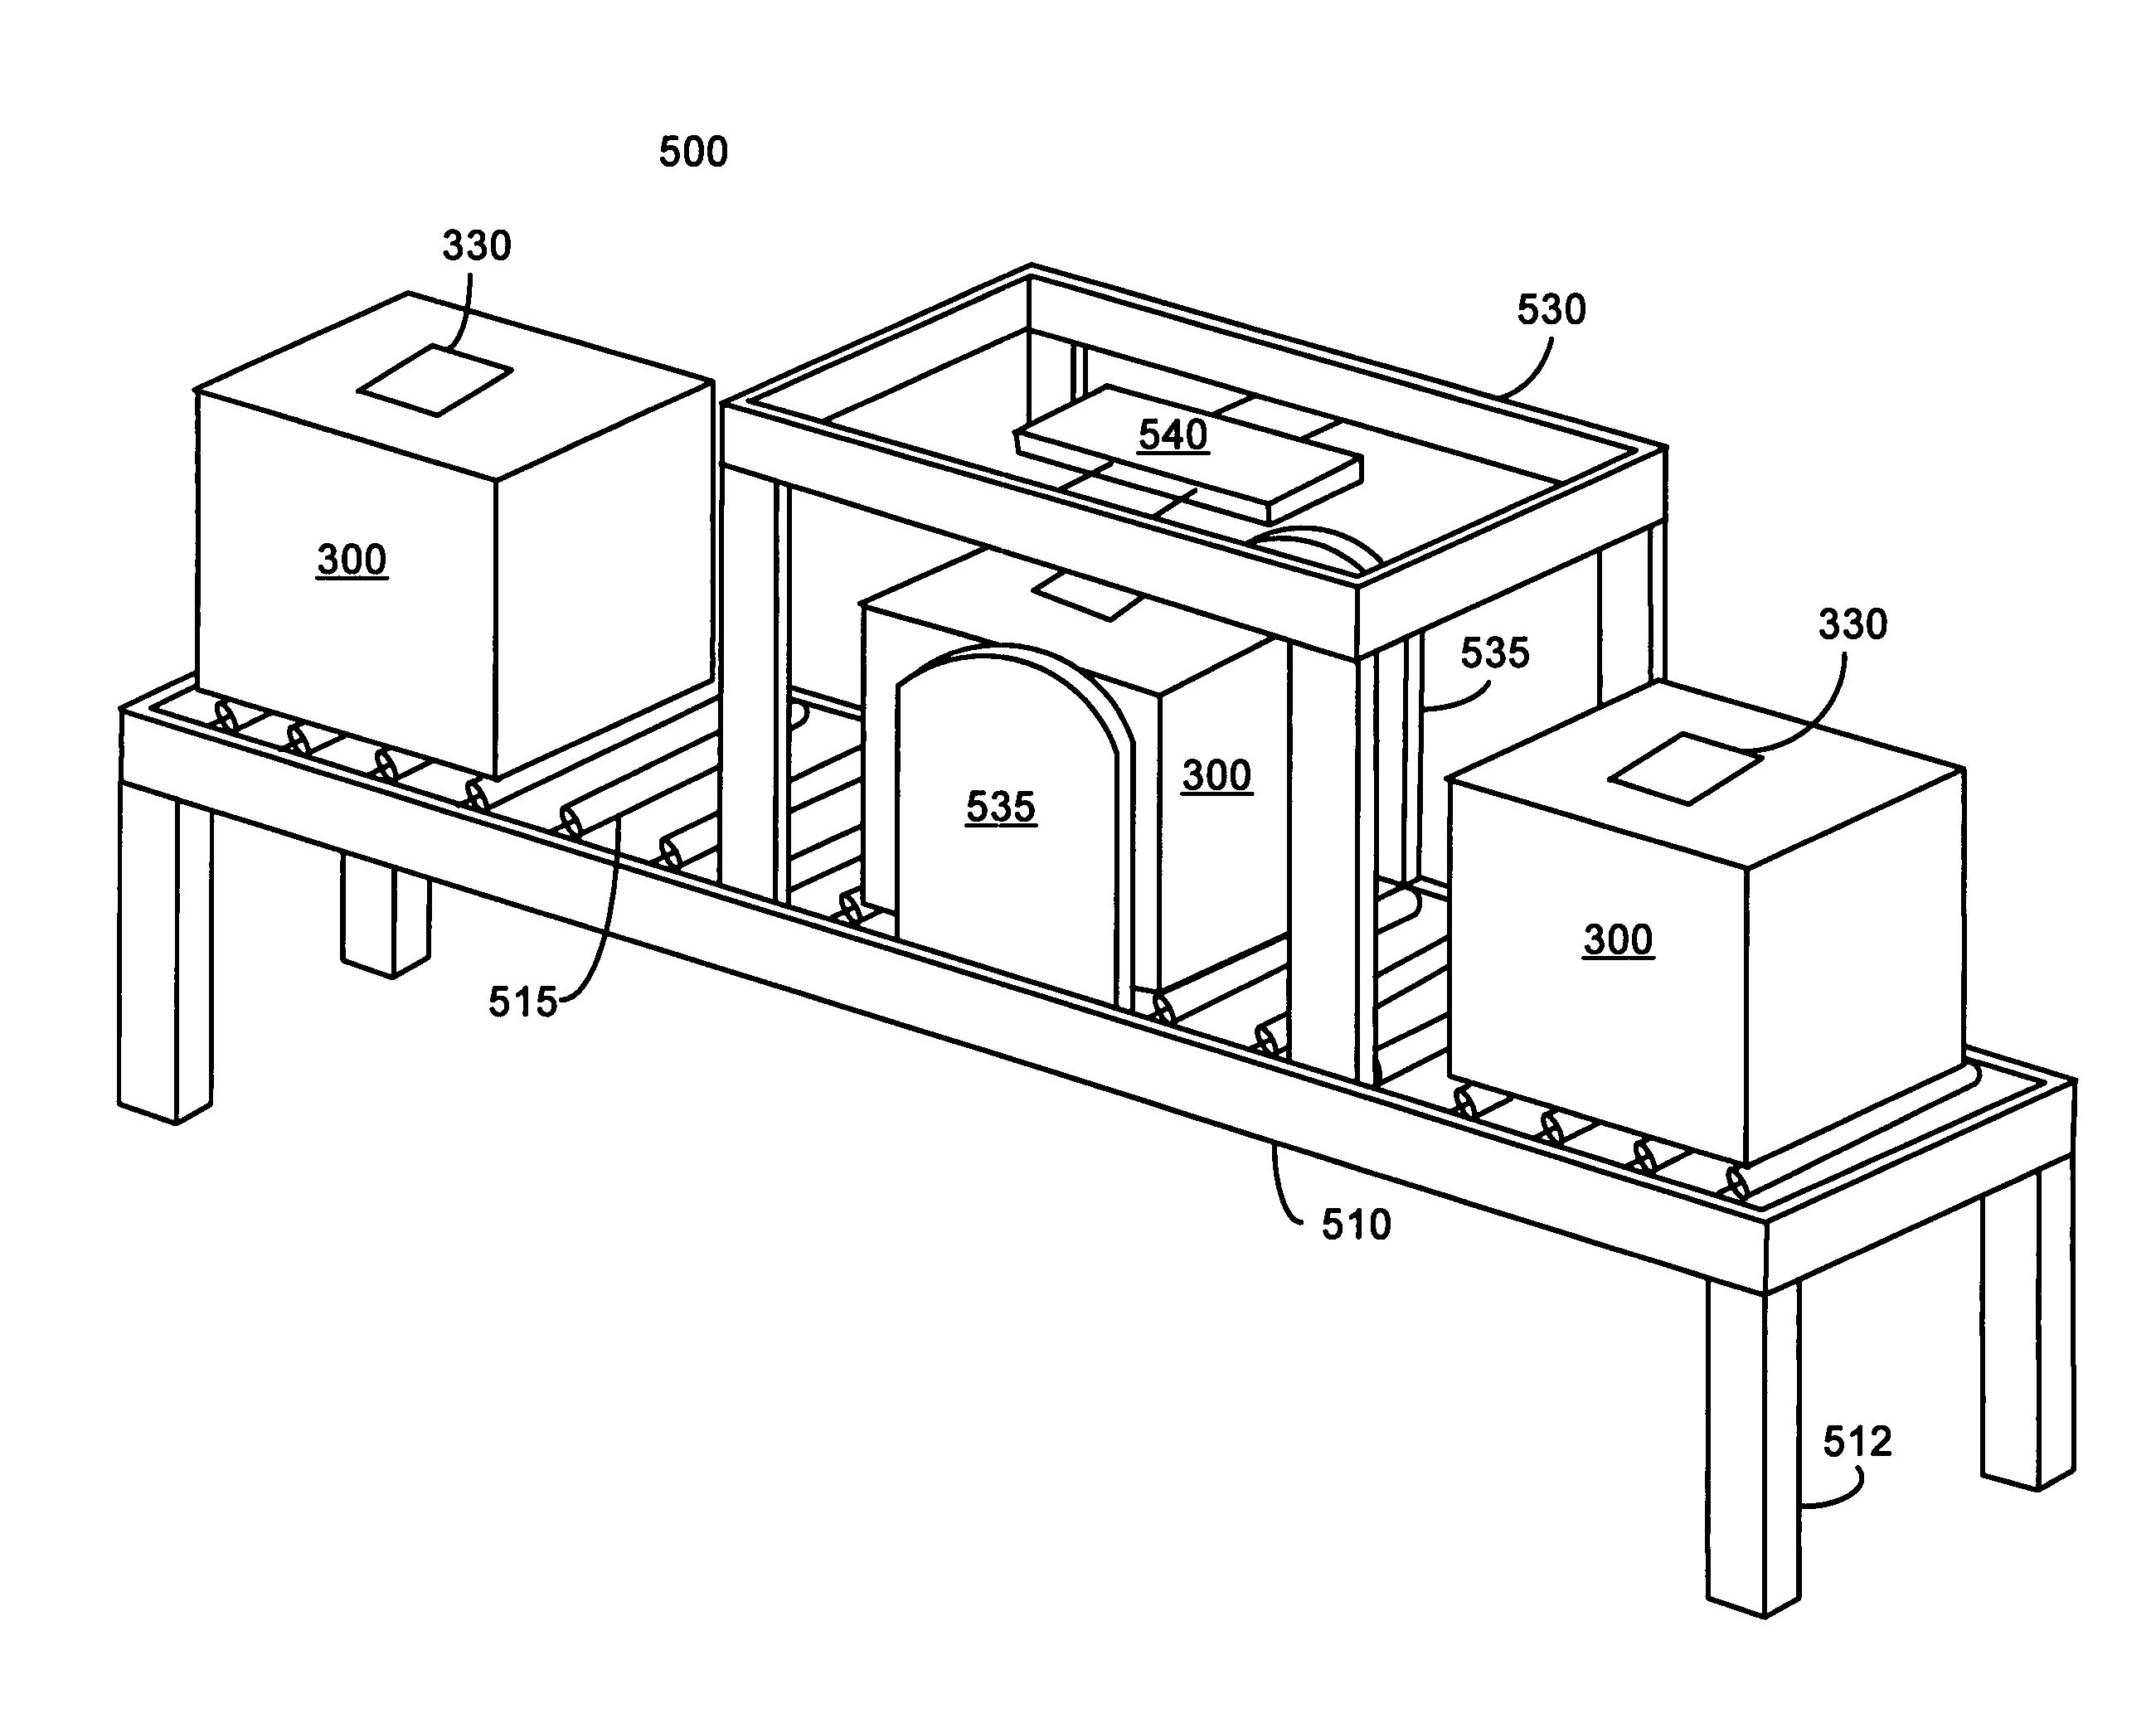 Surgical instrument tray shipping tote identification system and methods of using same